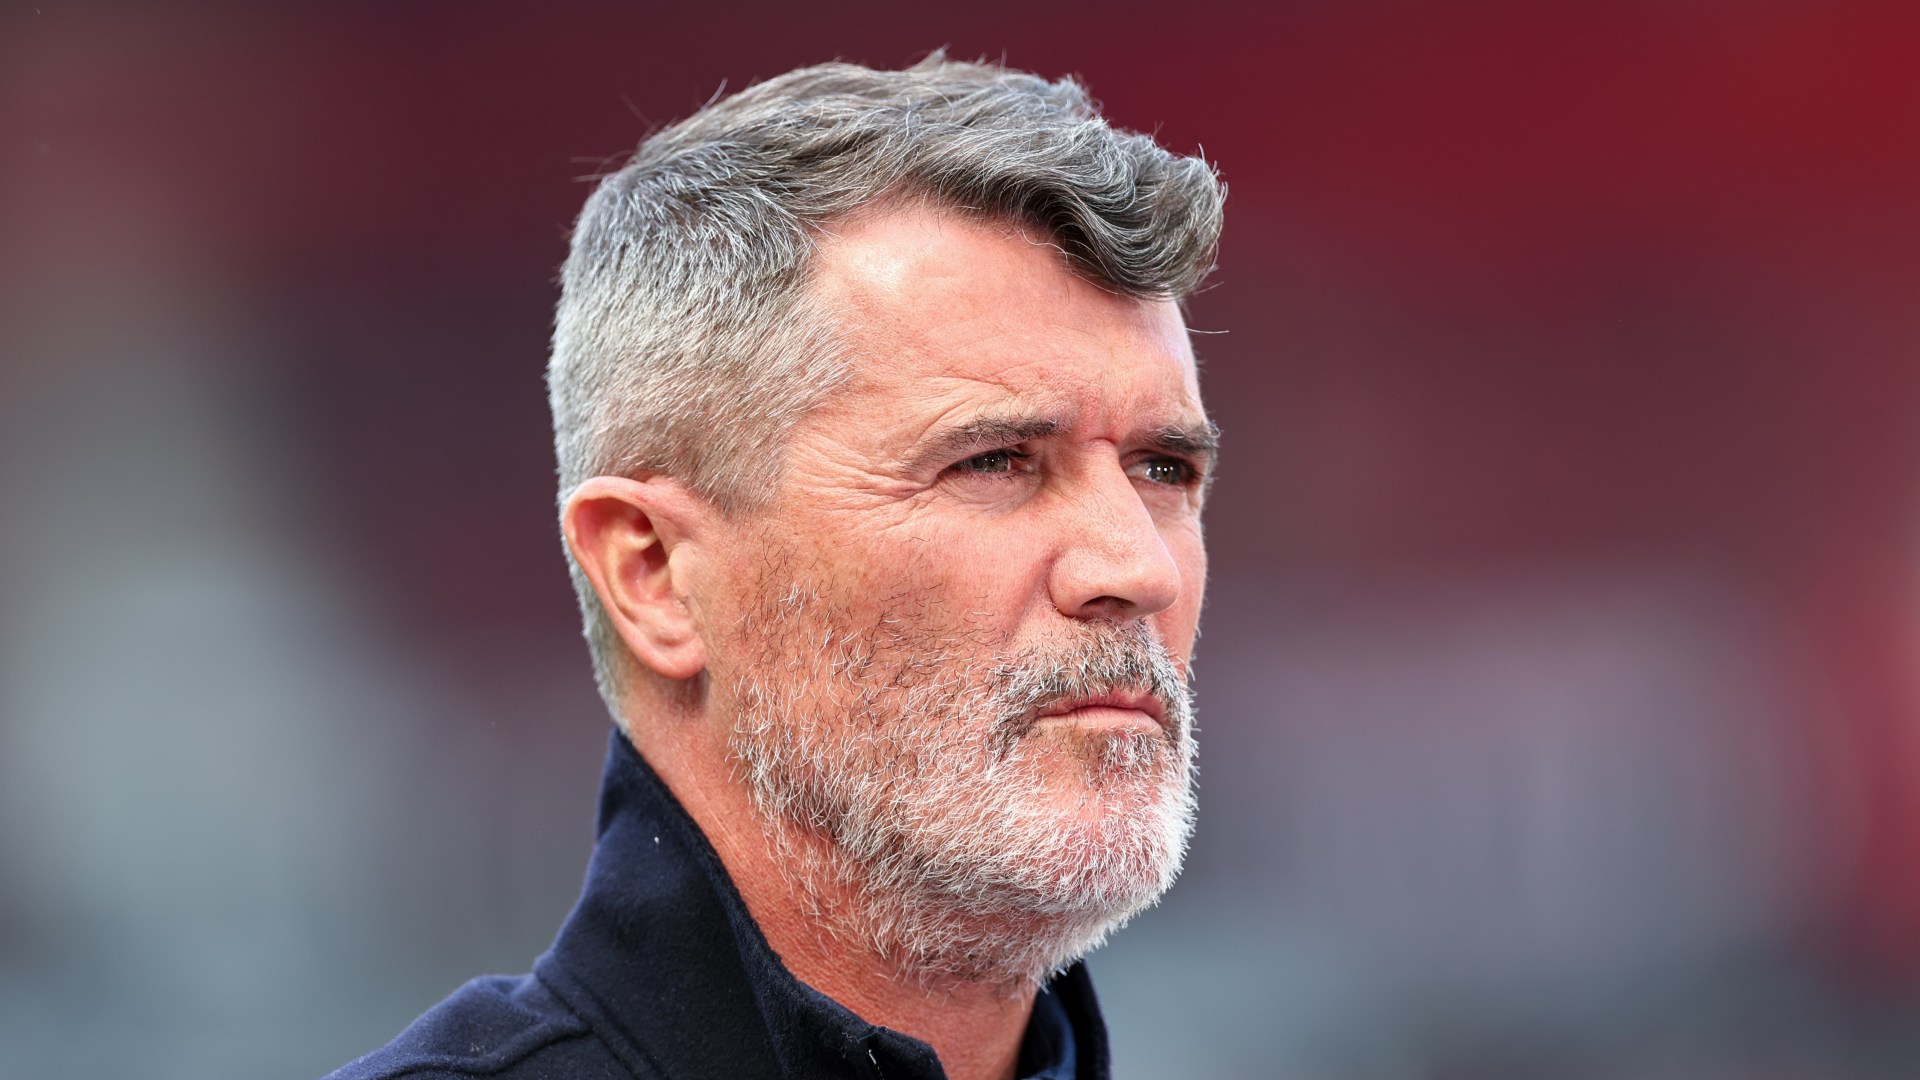 We will miss you – Roy Keane pays tribute to loved one after suffering heartbreaking bereavement [Video]